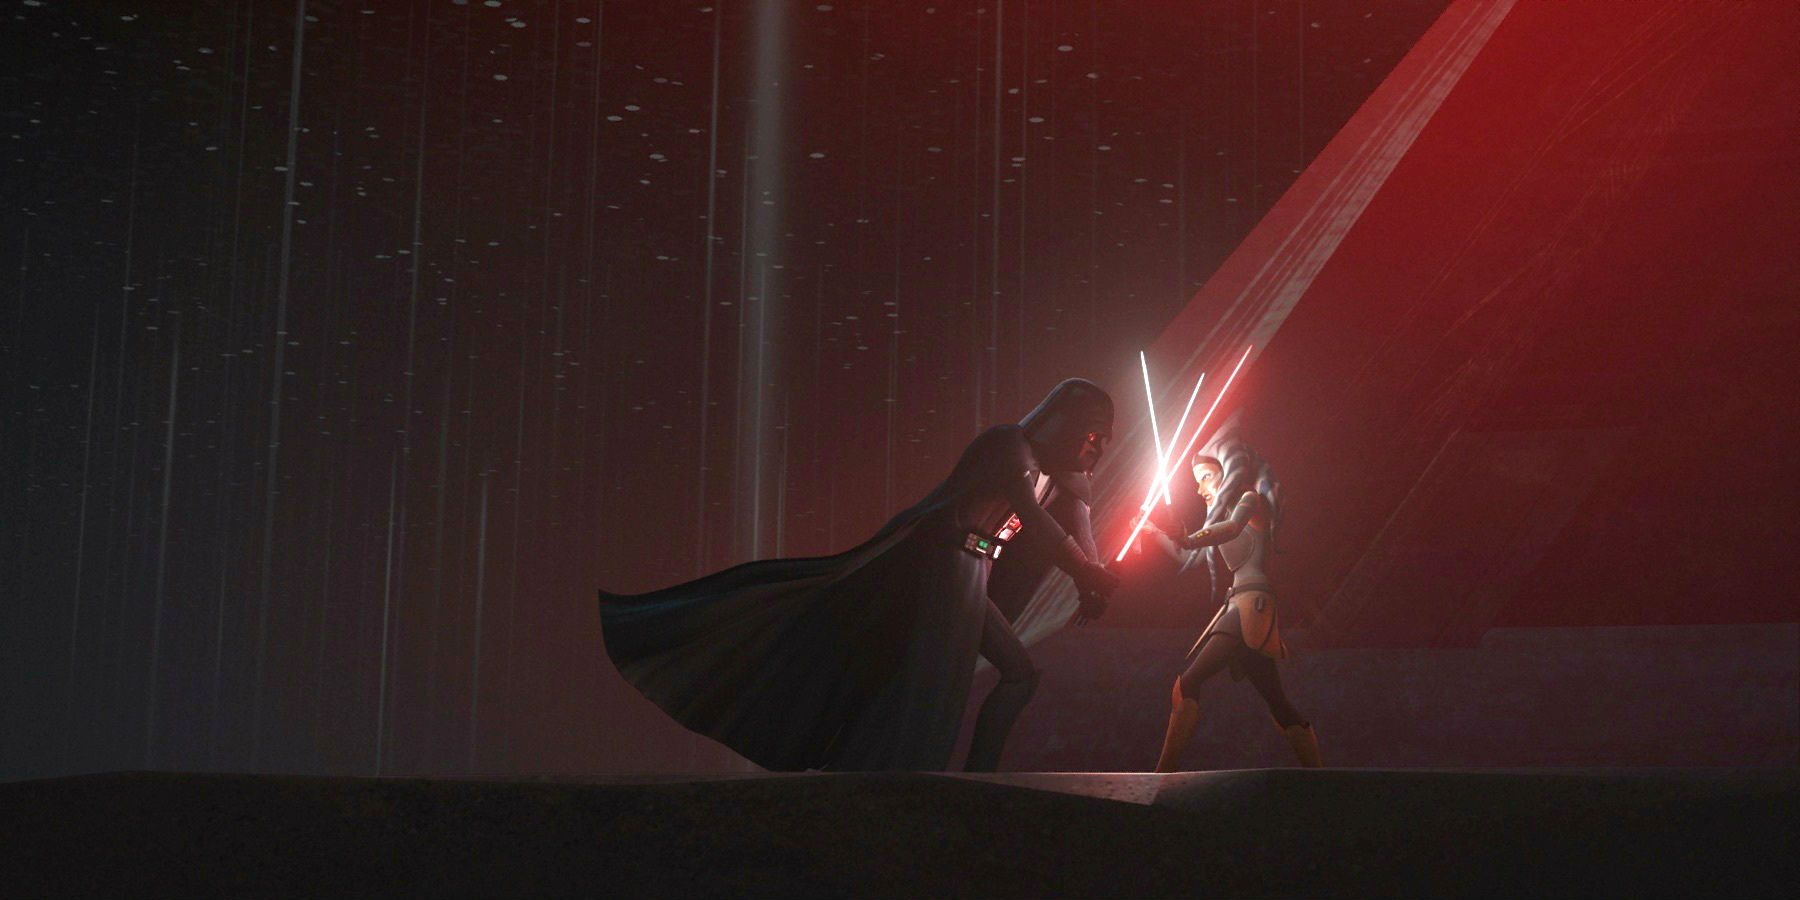 Darth Vader and Ahsoka Tano duel against a black and red background in Star Wars Rebels